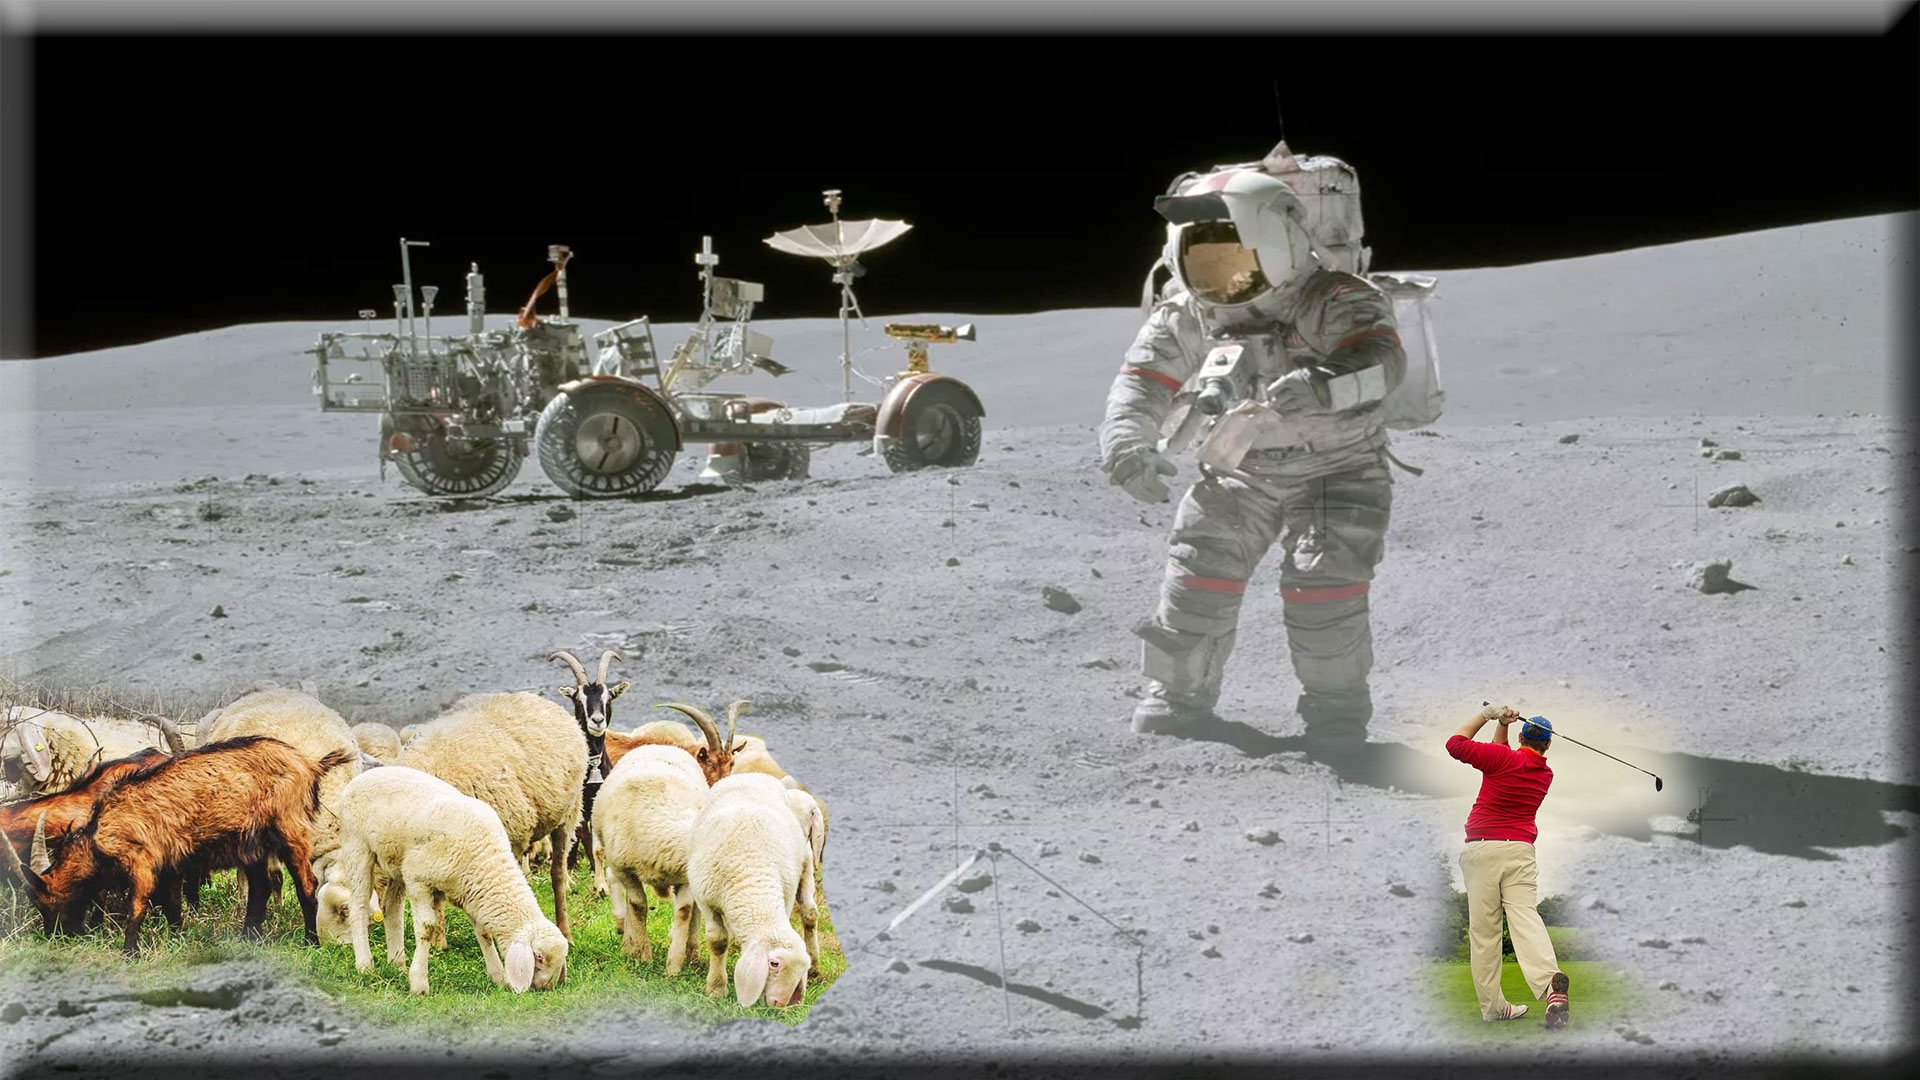 image of man on moon with man playing golf and sheep and goats grazing